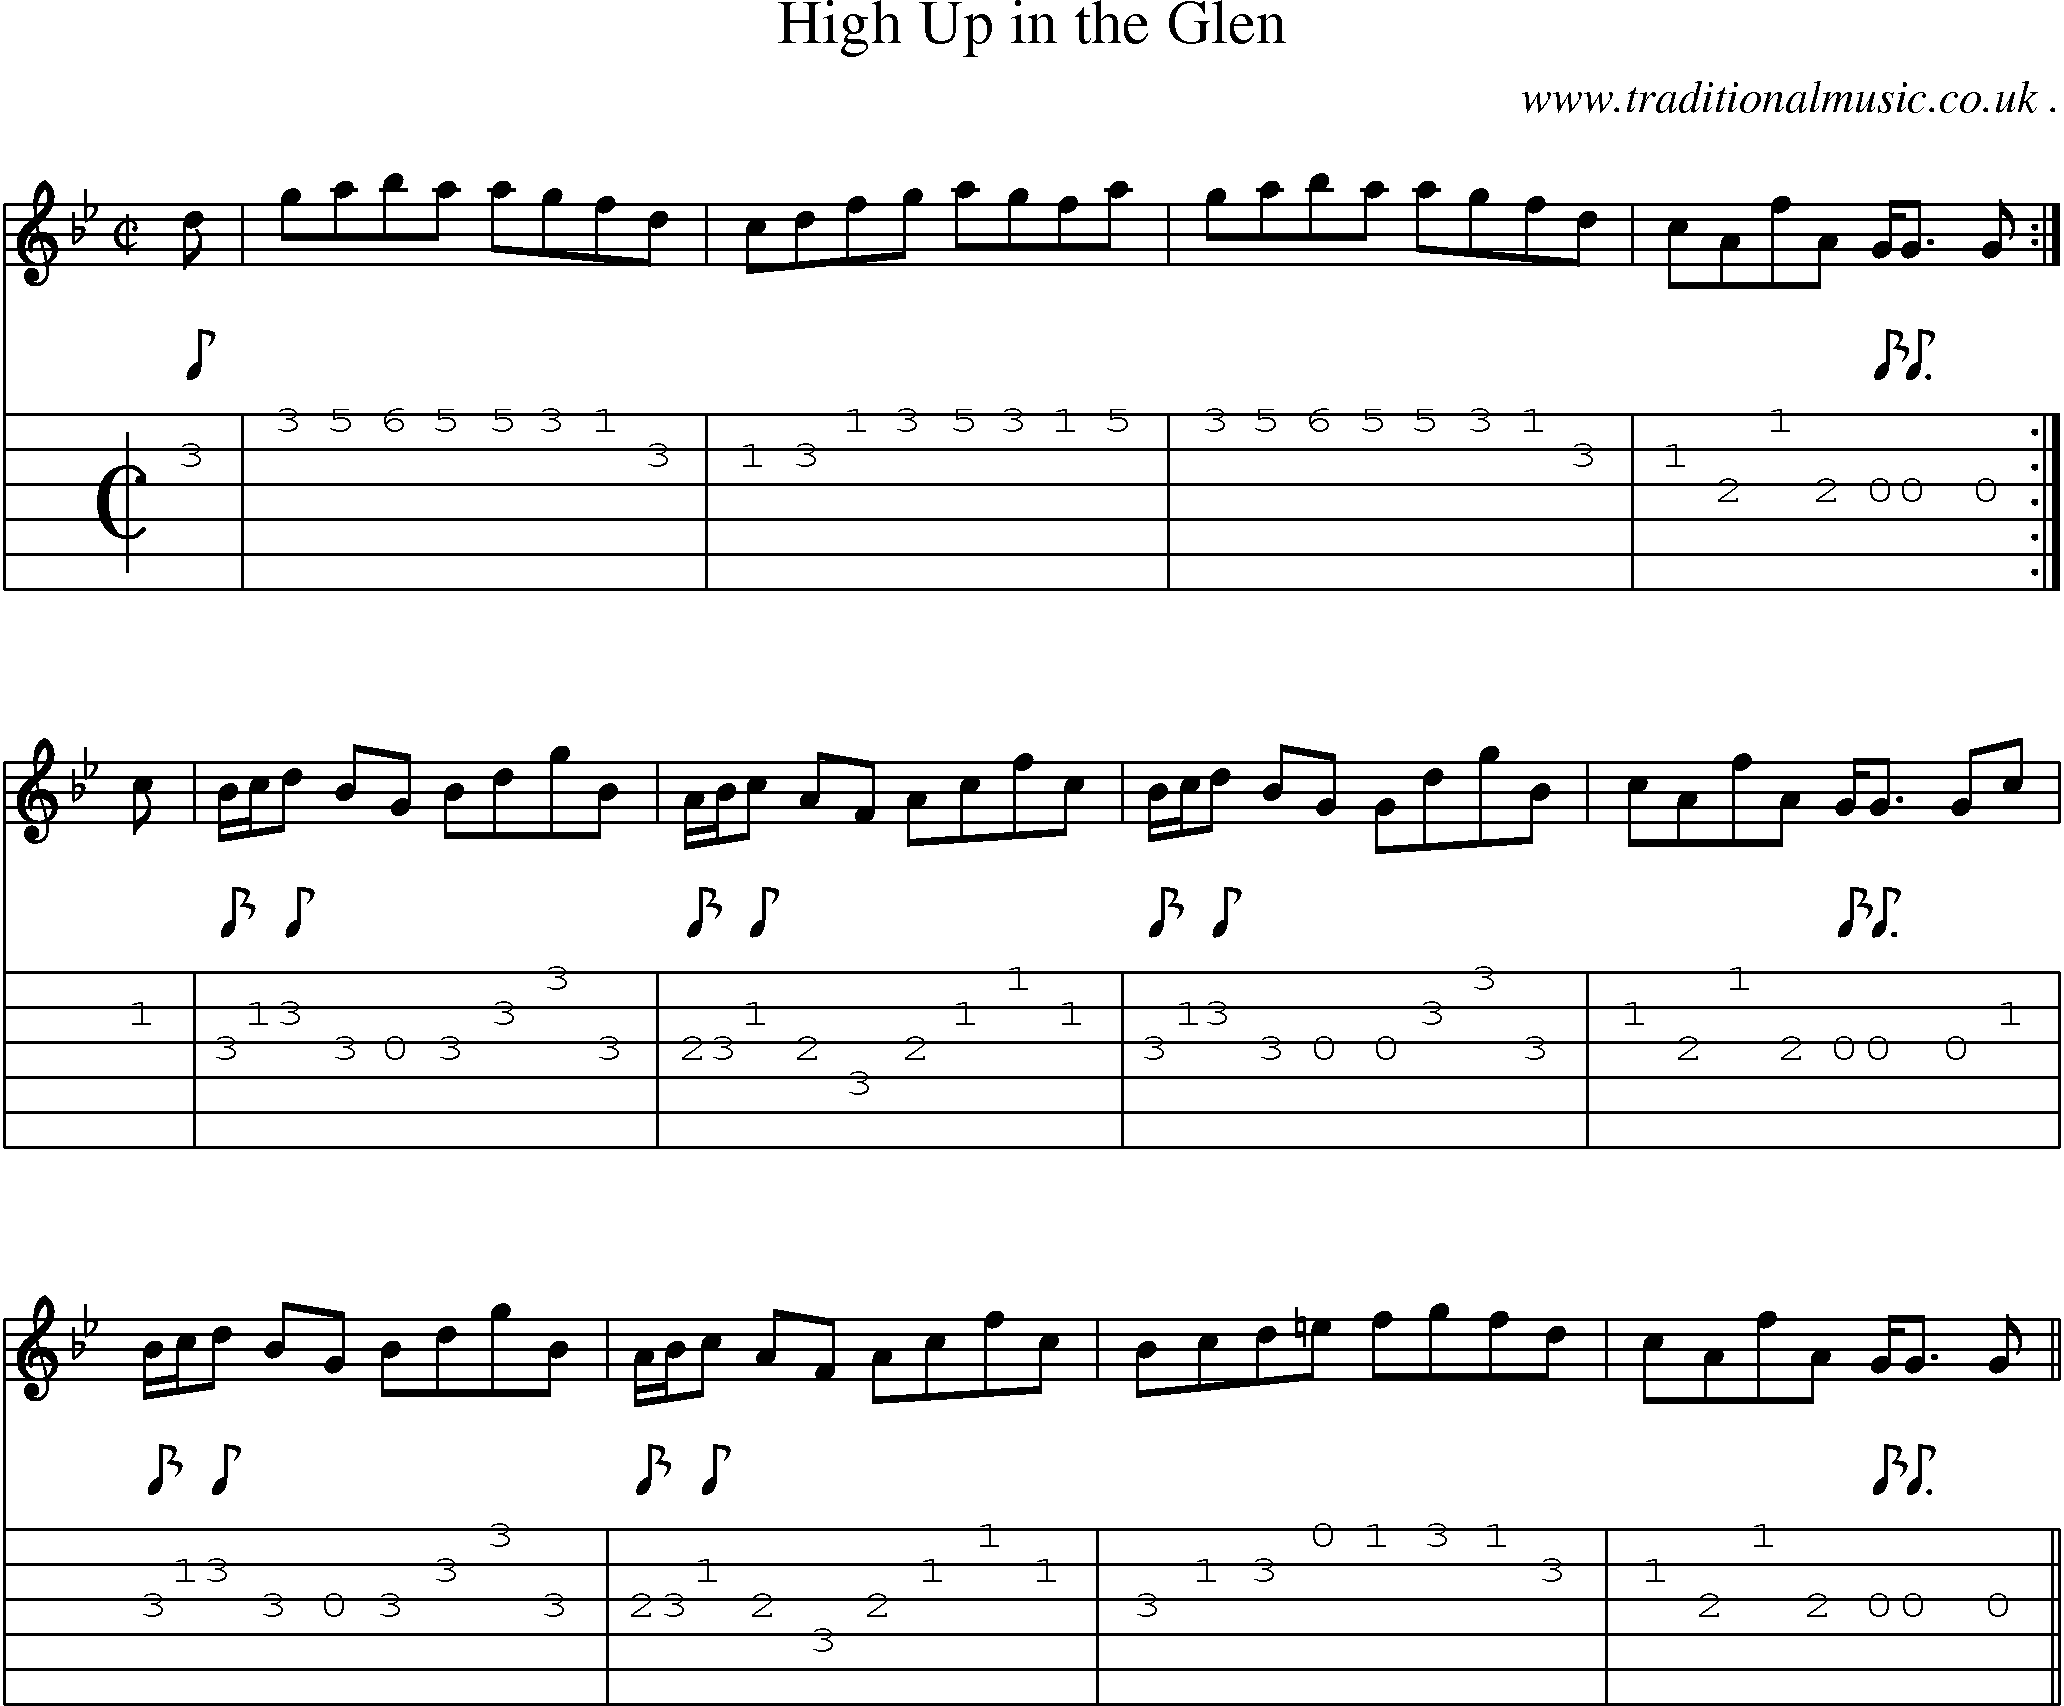 Sheet-music  score, Chords and Guitar Tabs for High Up In The Glen